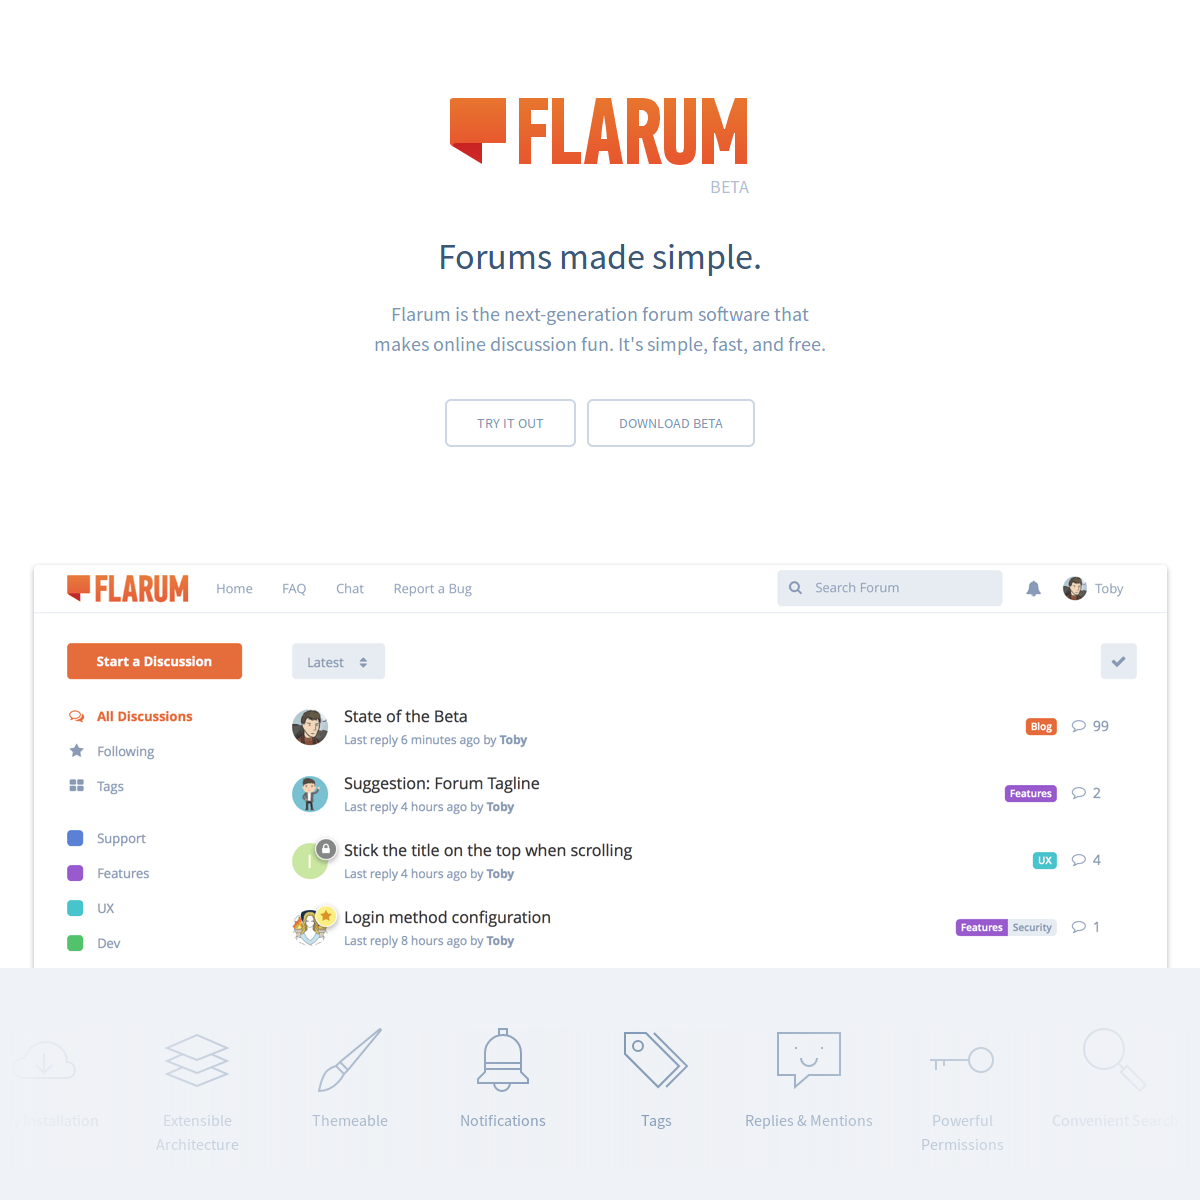 Facebook Login Sign Up button does nothing. - Flarum Community